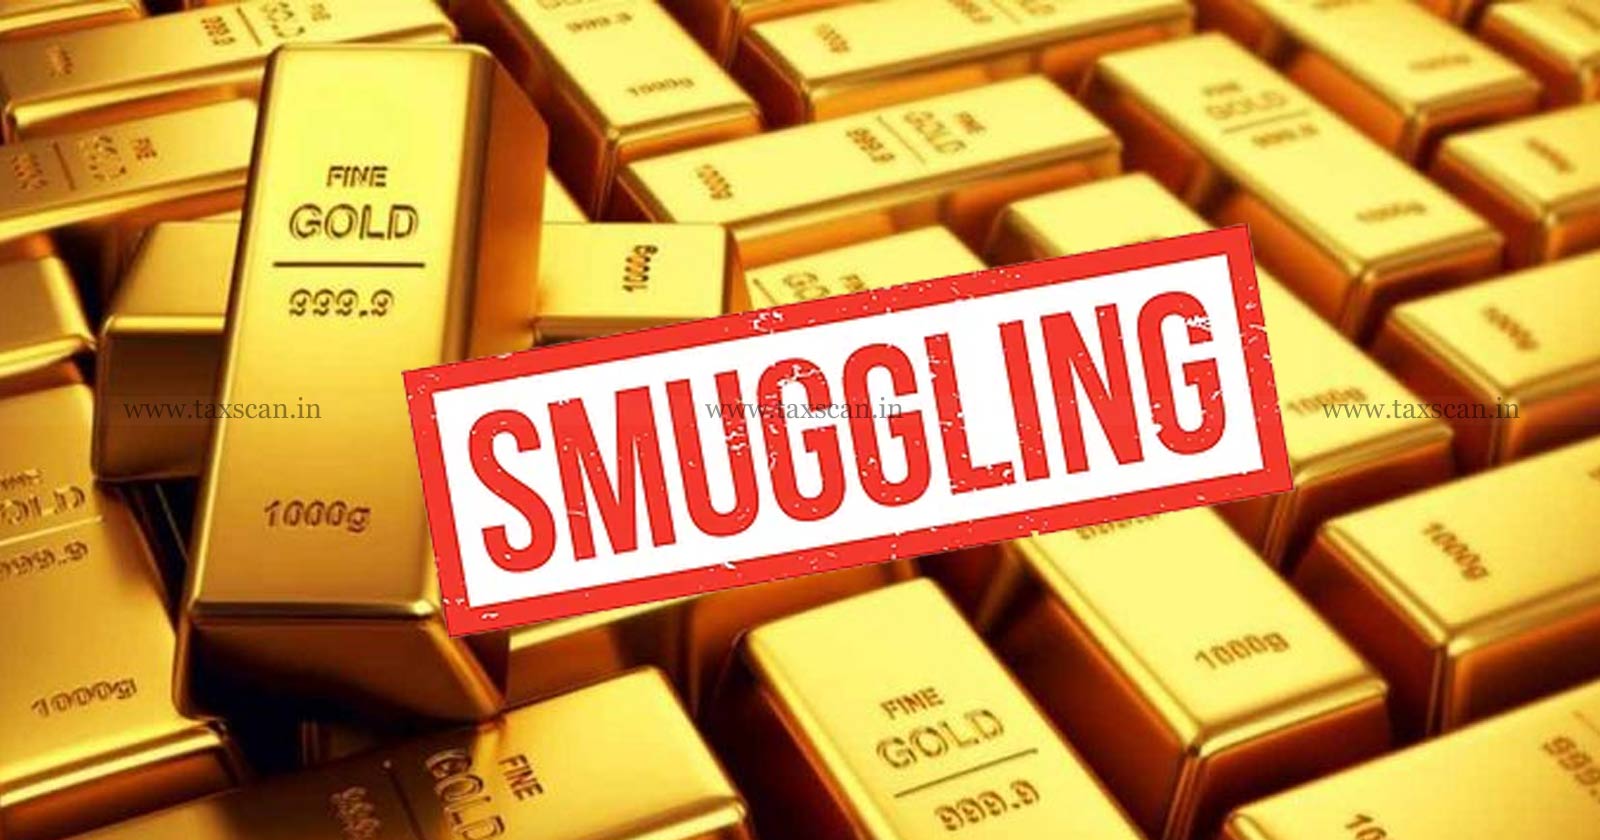 Declaration - Document liable - Document - Customs Act - CESTAT imposes Penalty of Rs 10 Lakhs for Smuggling Gold -Penalty of Rs 10 Lakhs for Smuggling Gold -Smuggling Gold - taxscan